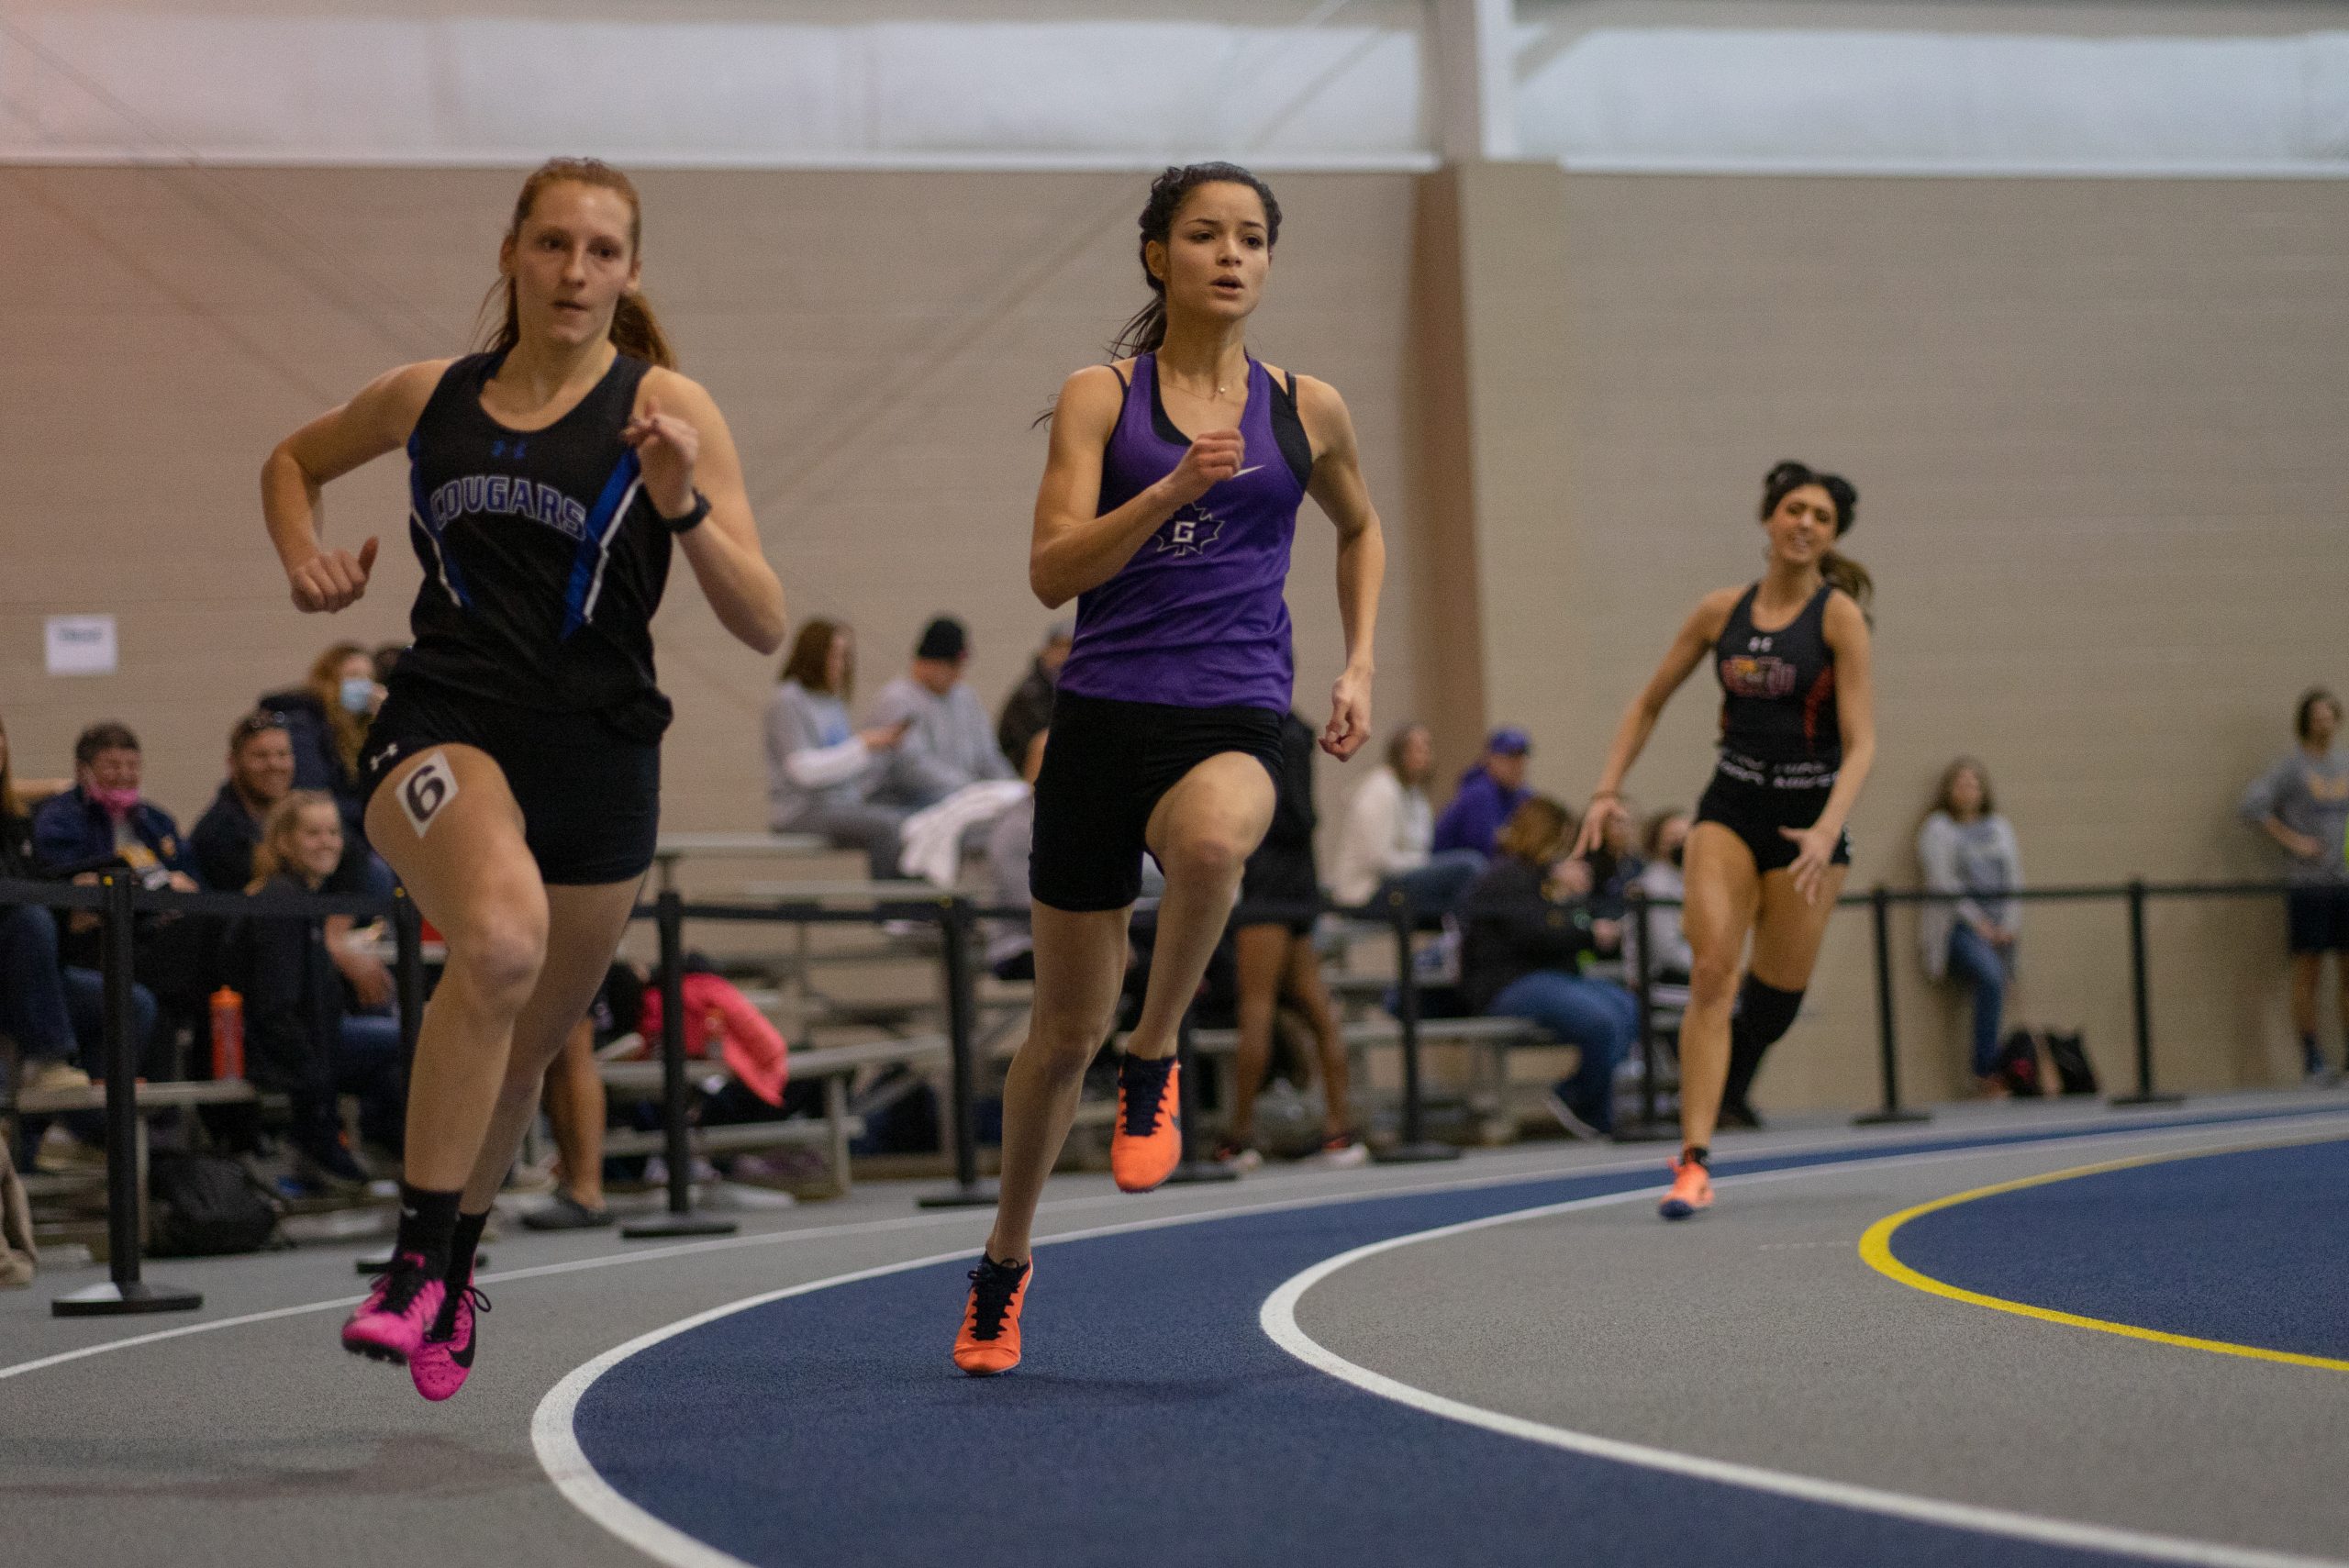 Maria Maldonado and another runner compete in an indoor track event.